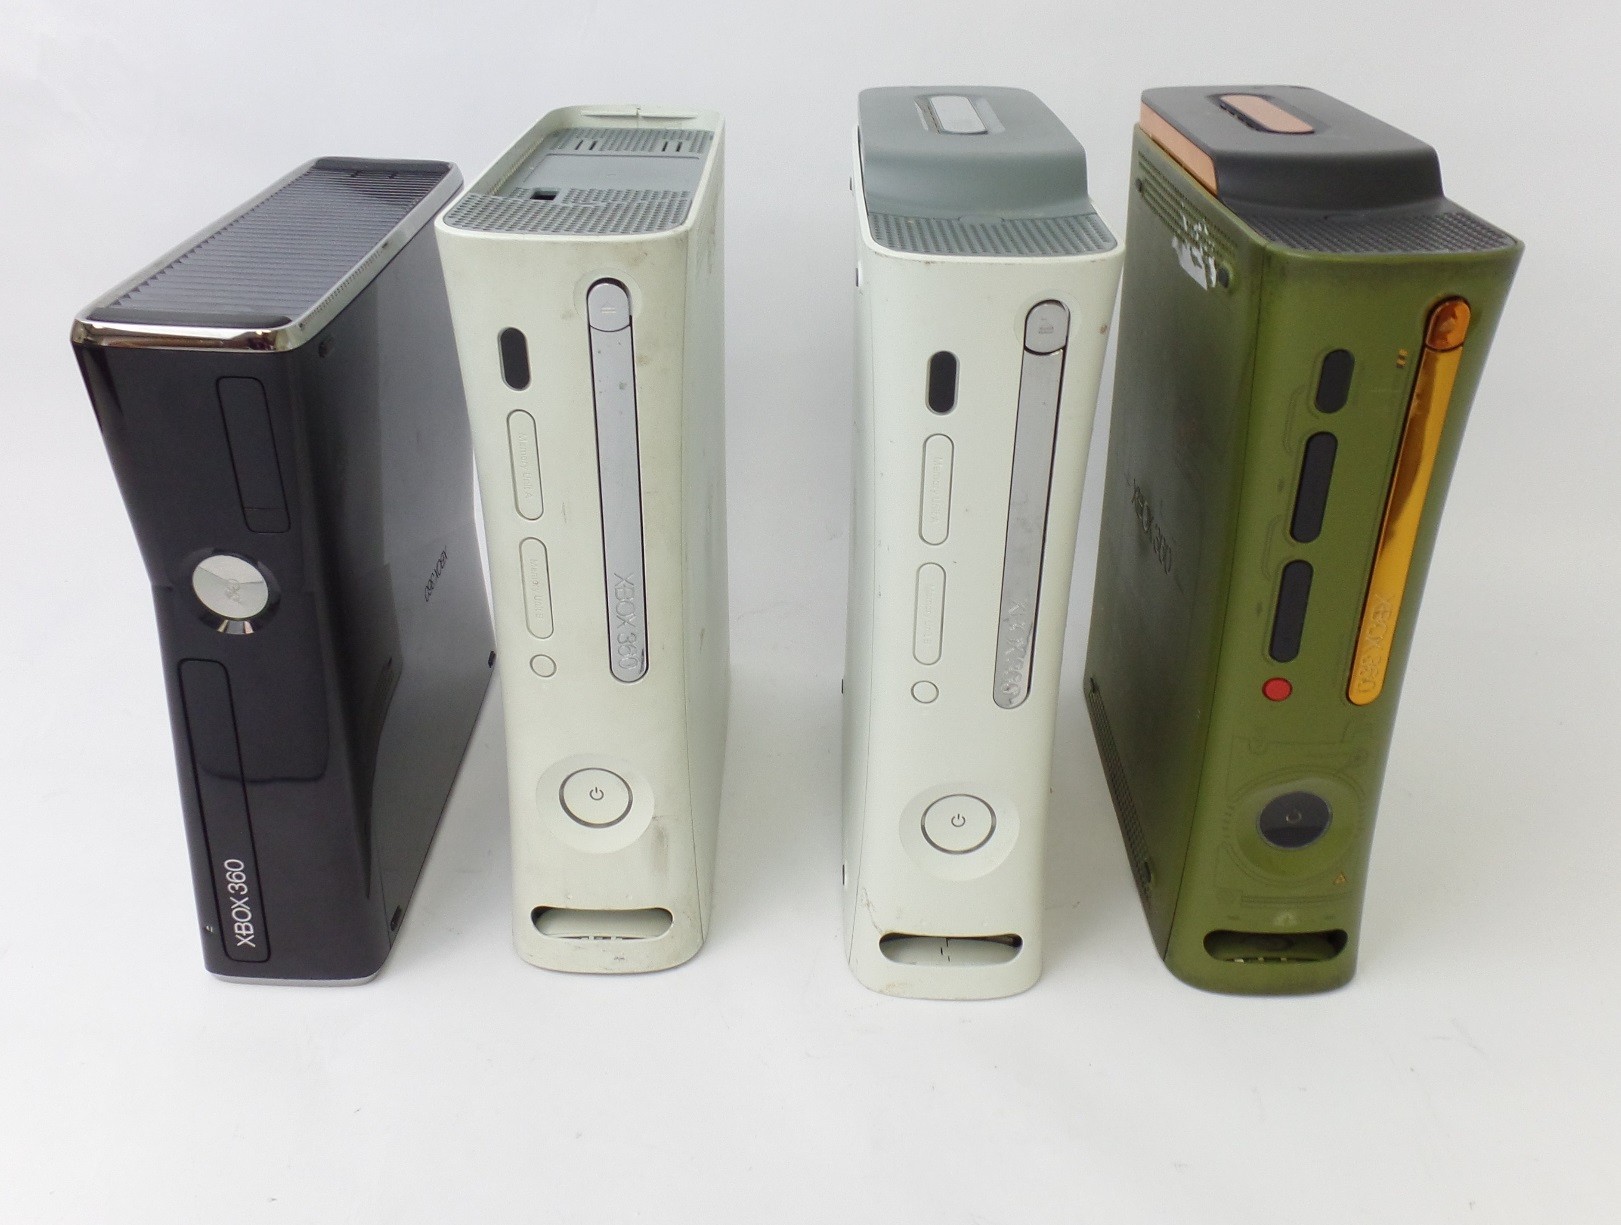 Read: defective Lot of 4 Xbox 360 S Console #1